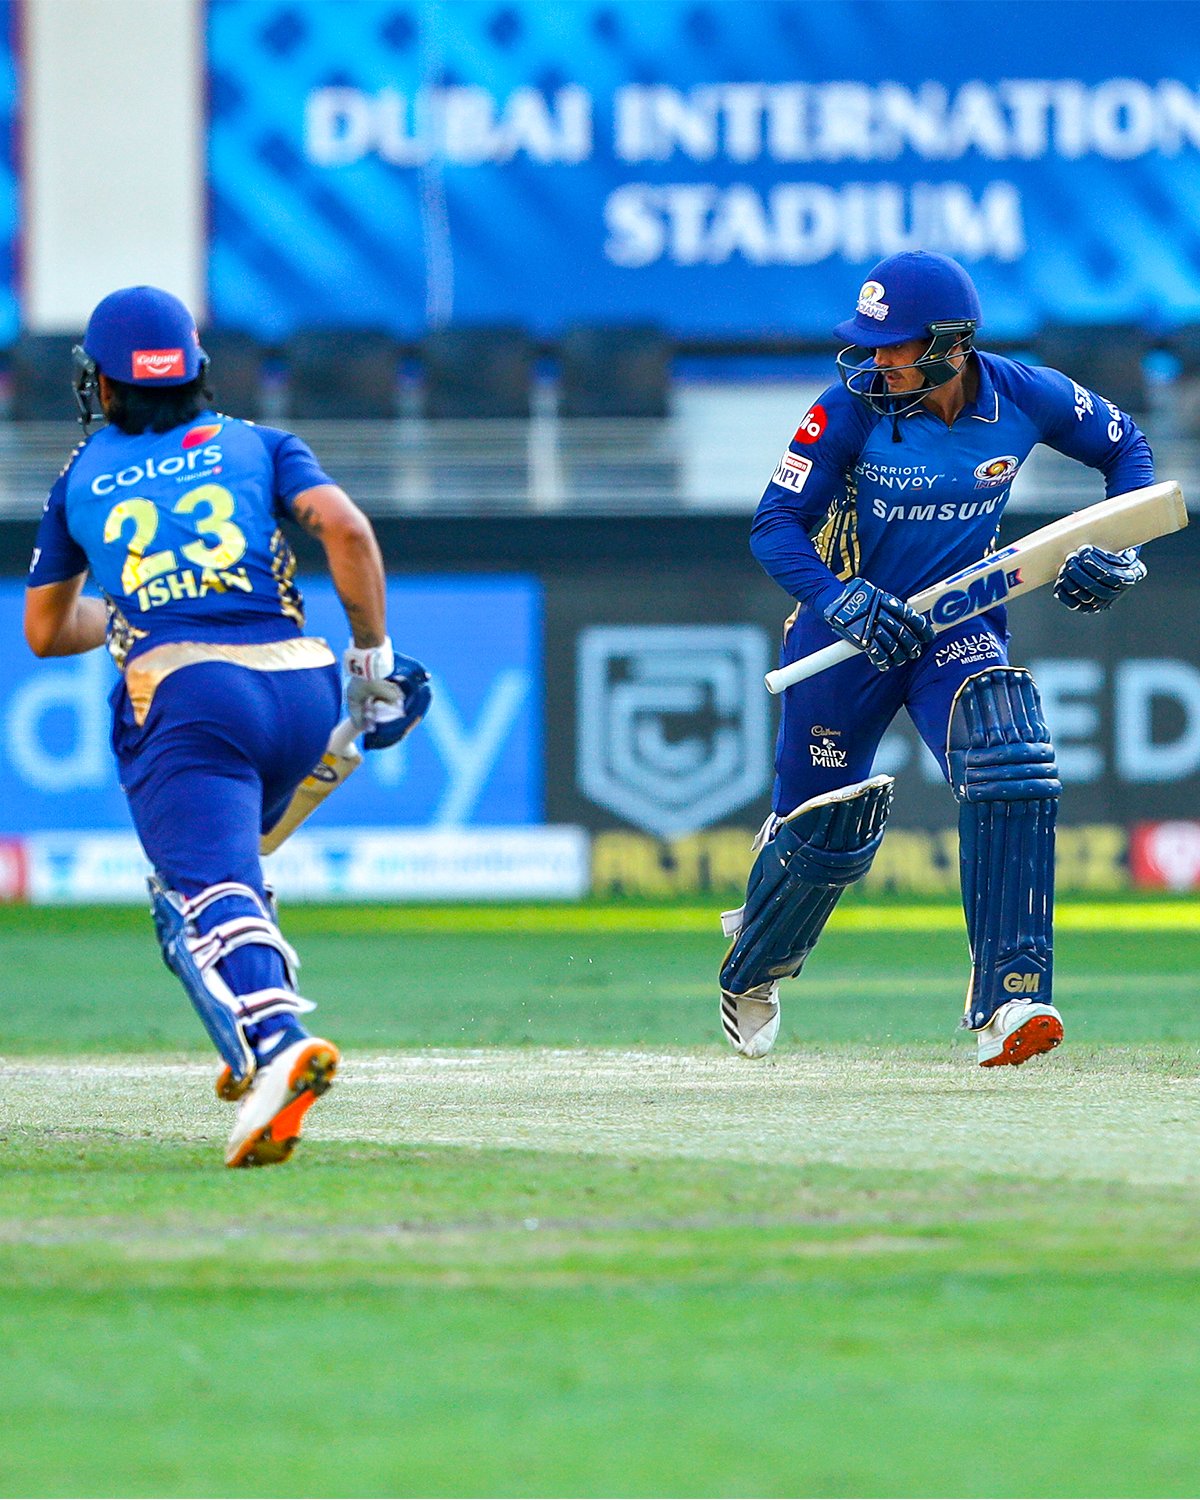 Quinton De Kock and Ishan Kishan in action during the Indian Premier League match between Mumbai Indians and Delhi Capitals. Photo Courtesy: Mumbai Indians/ twitter